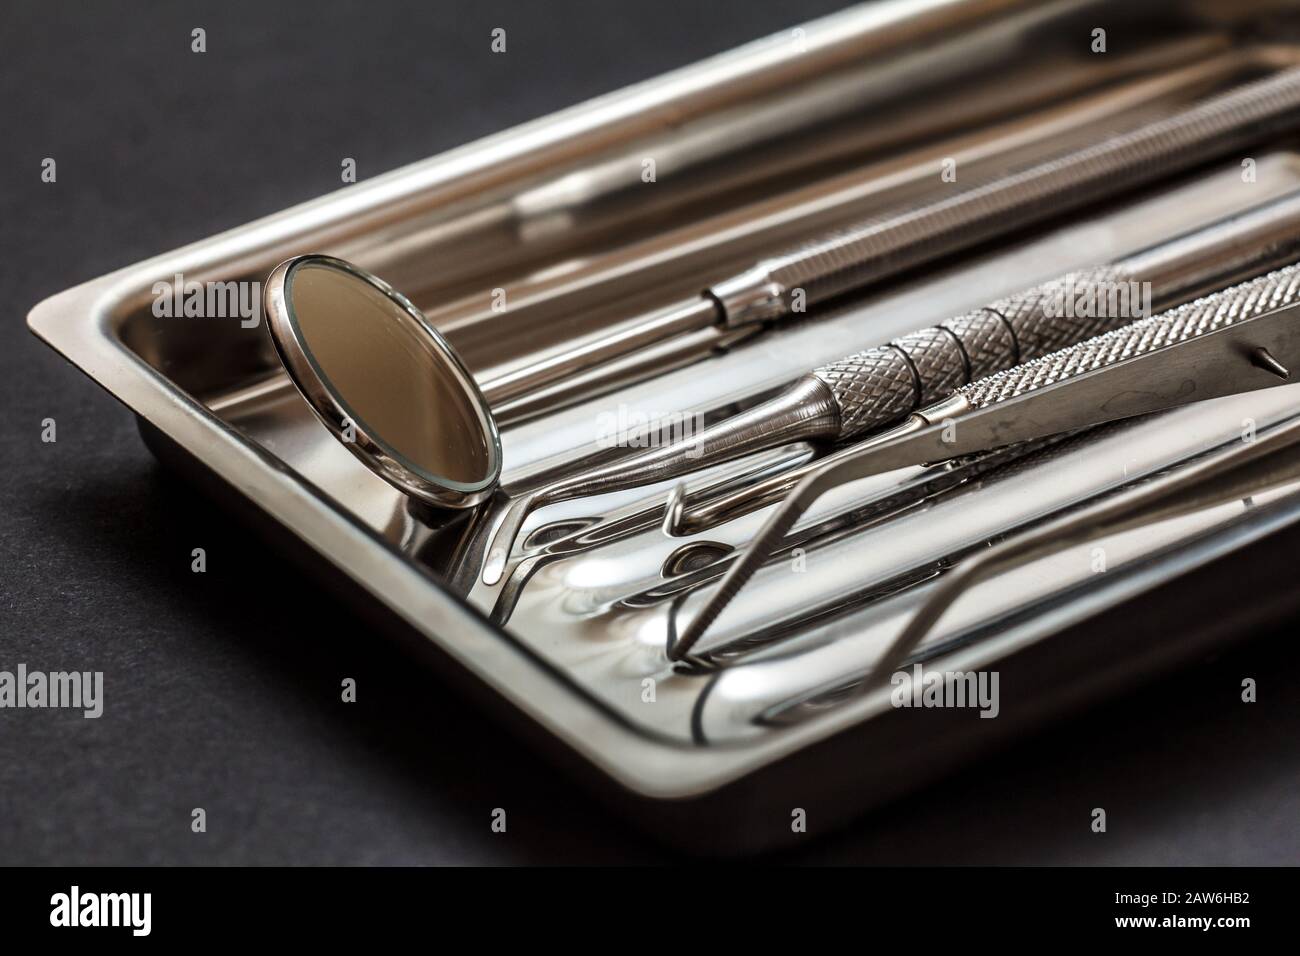 Close-up view of composite filling instruments for dental treatment. Medical tools in stainless steel tray on black background. Shallow depth of field Stock Photo